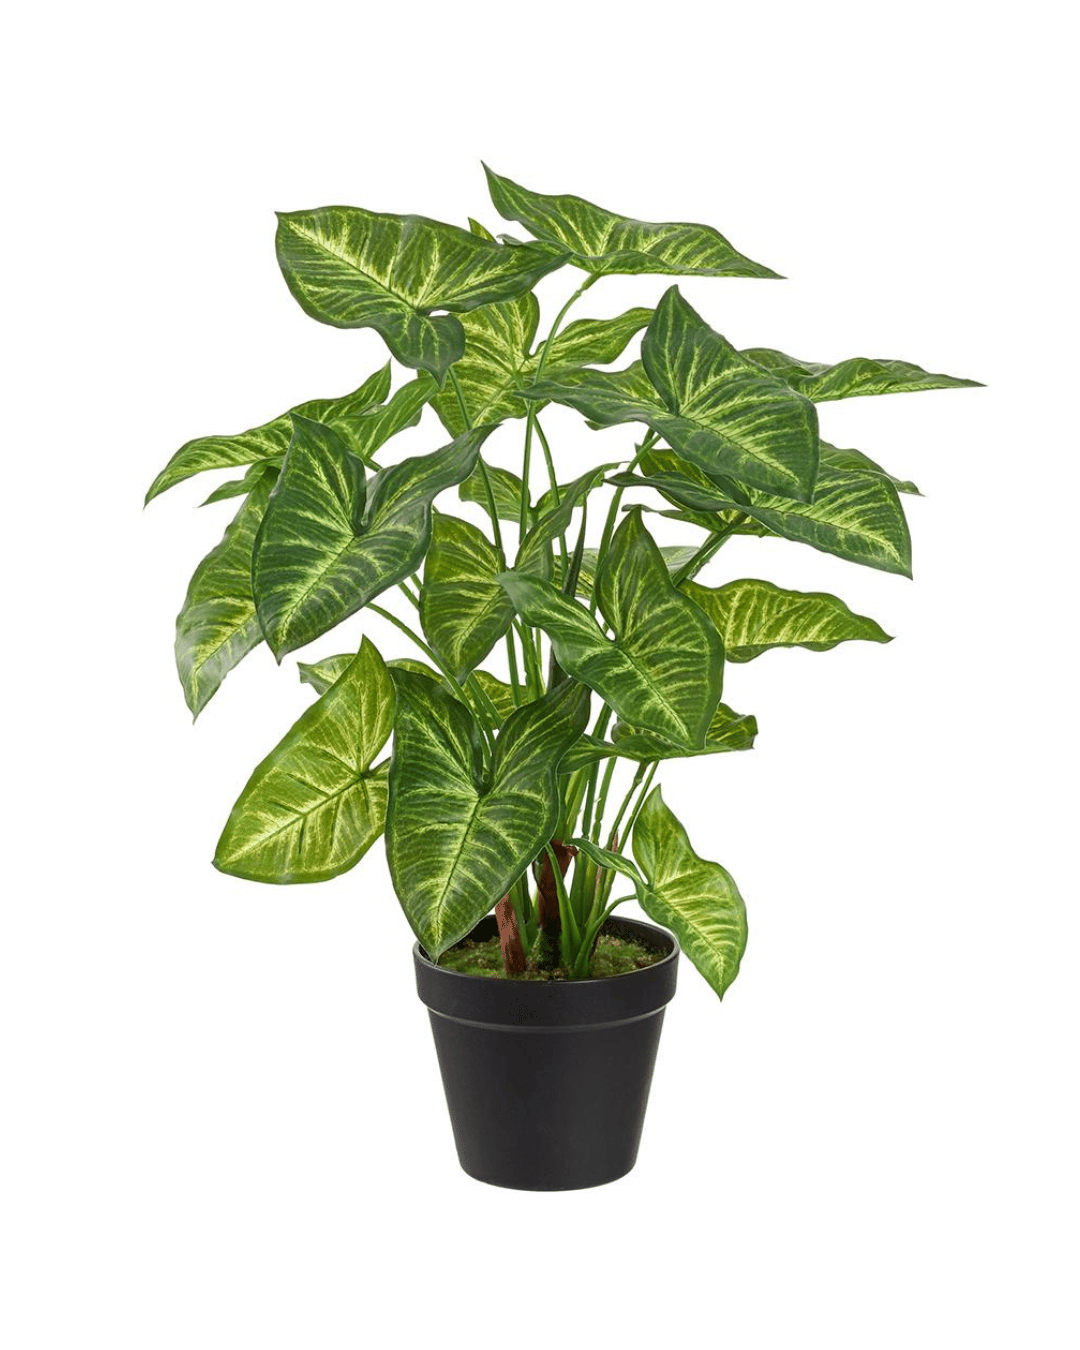 A lush AllState Floral And Craft 18&quot; Arrowhead plant (Syngonium podophyllum) with vibrant green and white leaves, growing in a black pot typical of a Scottsdale Arizona bungalow, isolated on a white background.